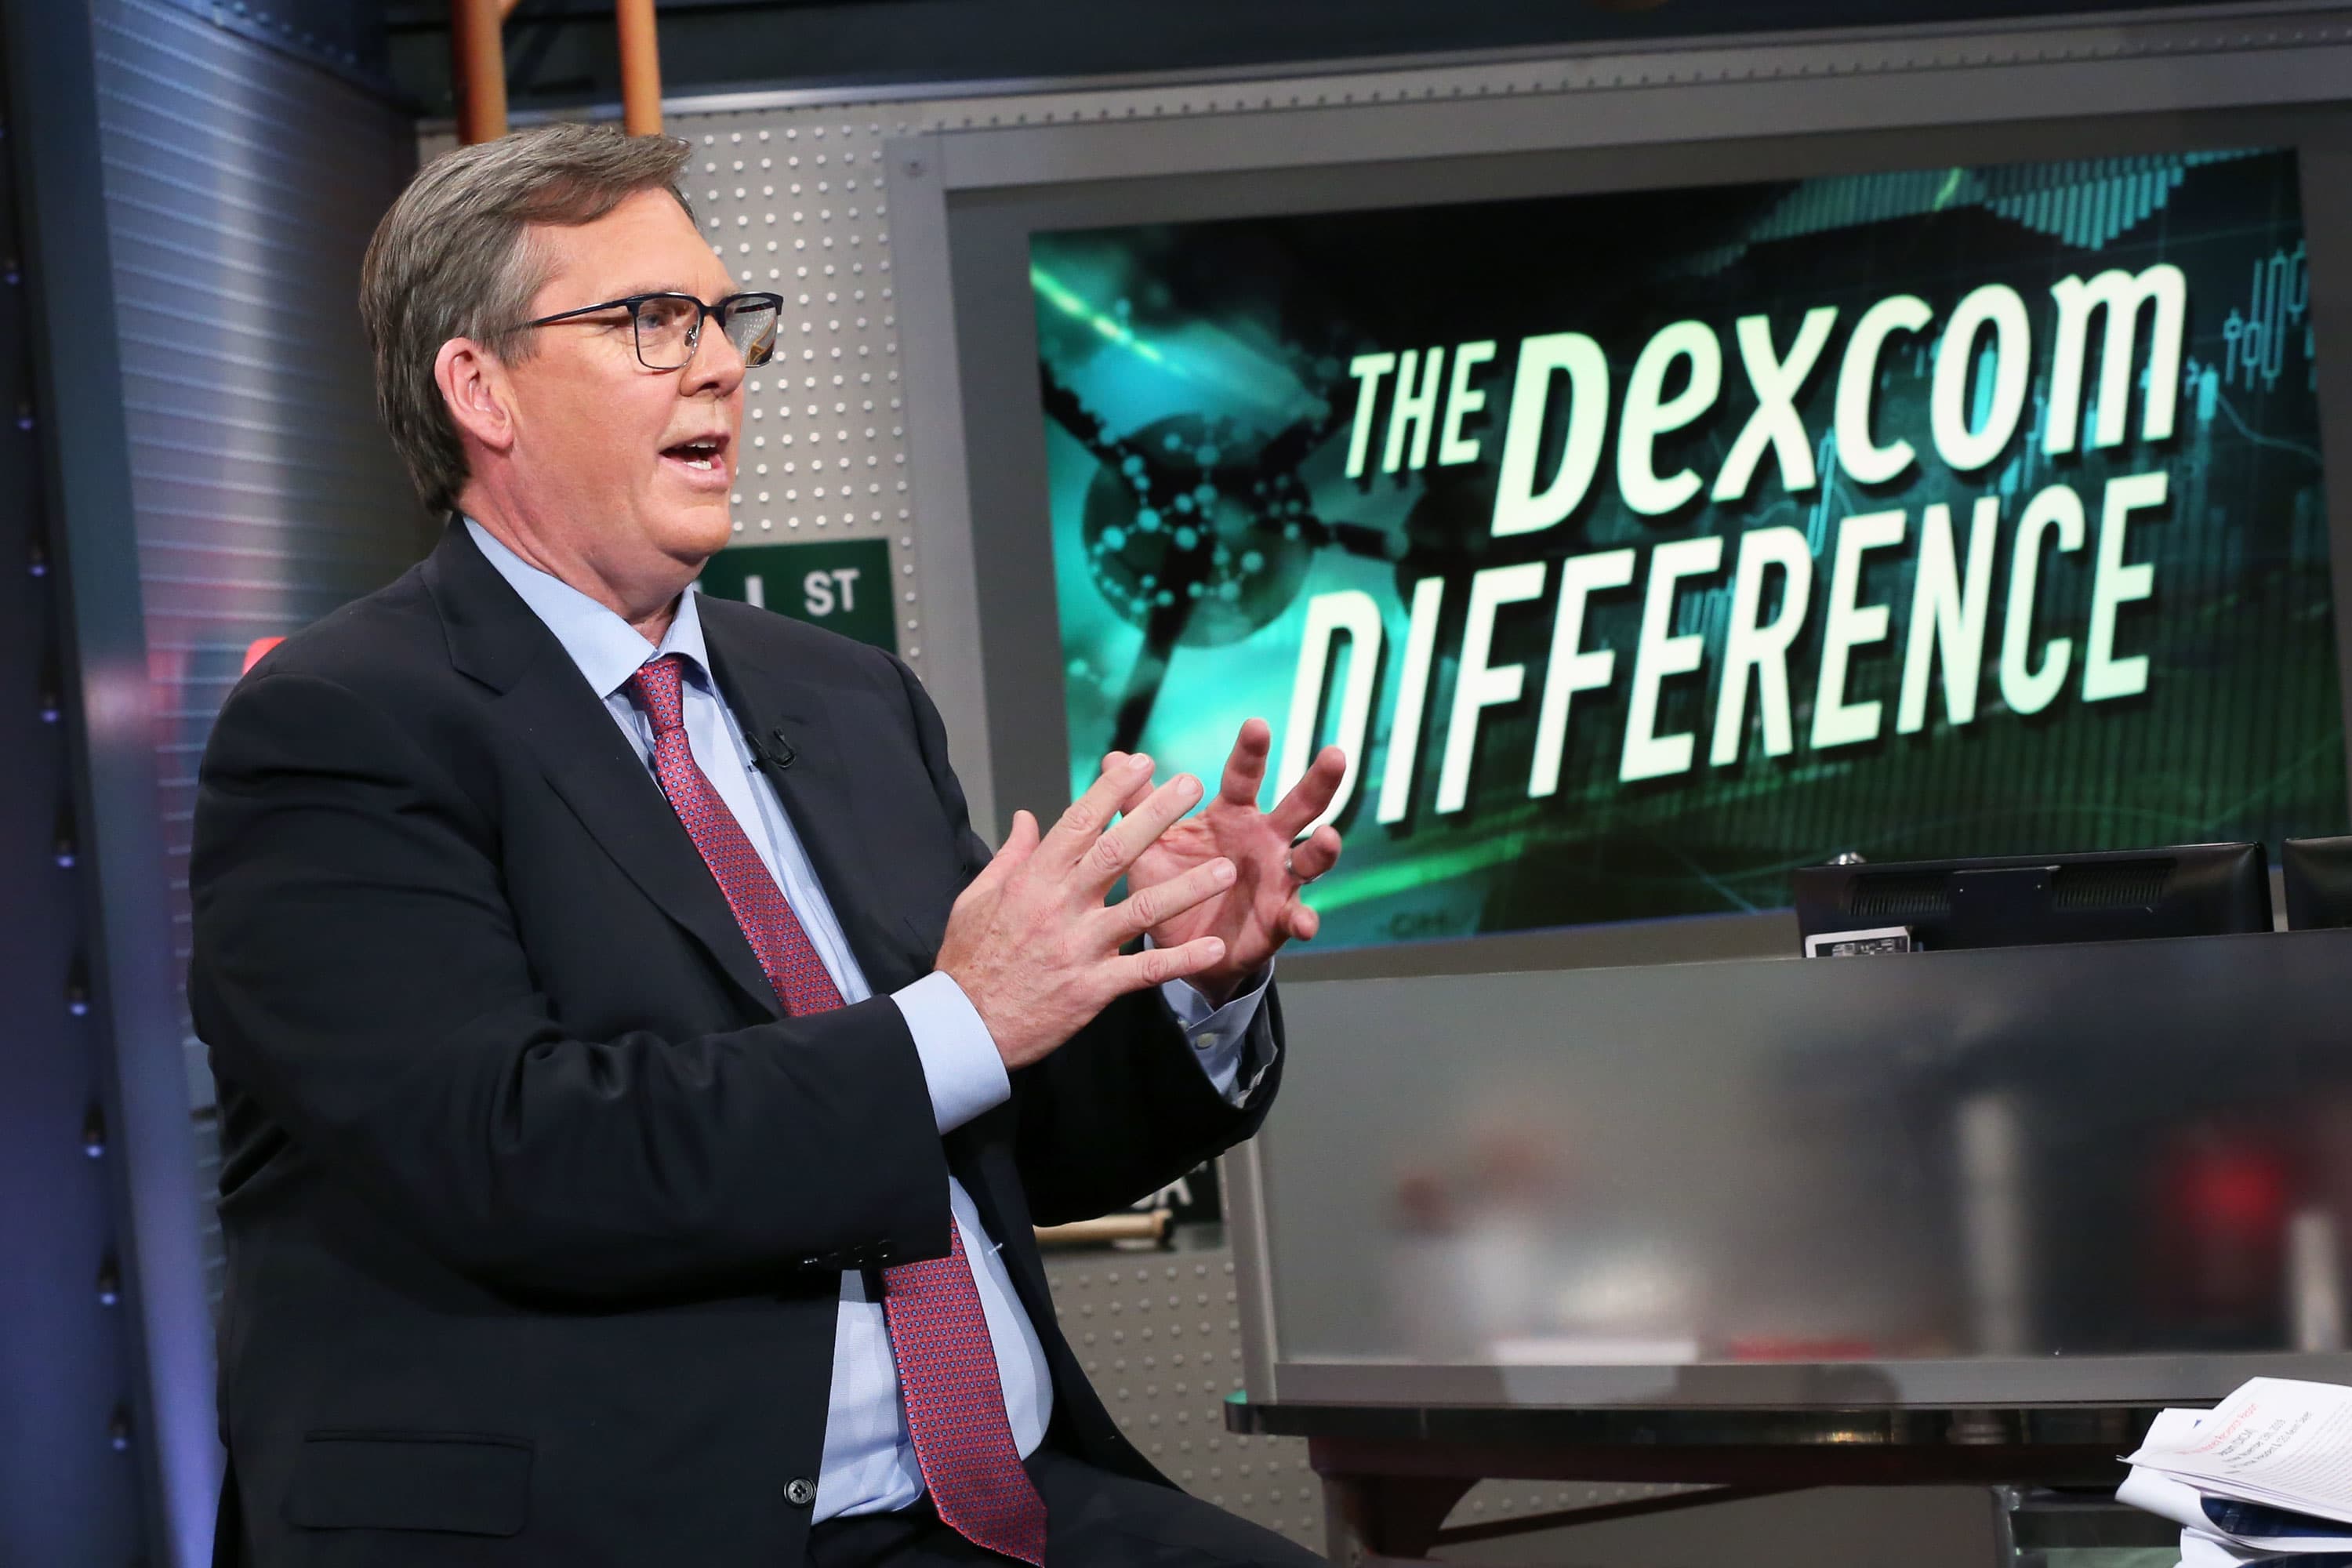 Dexcom CEO Kevin Sayer shows Nick Mills’ Super Bowl ad with the company